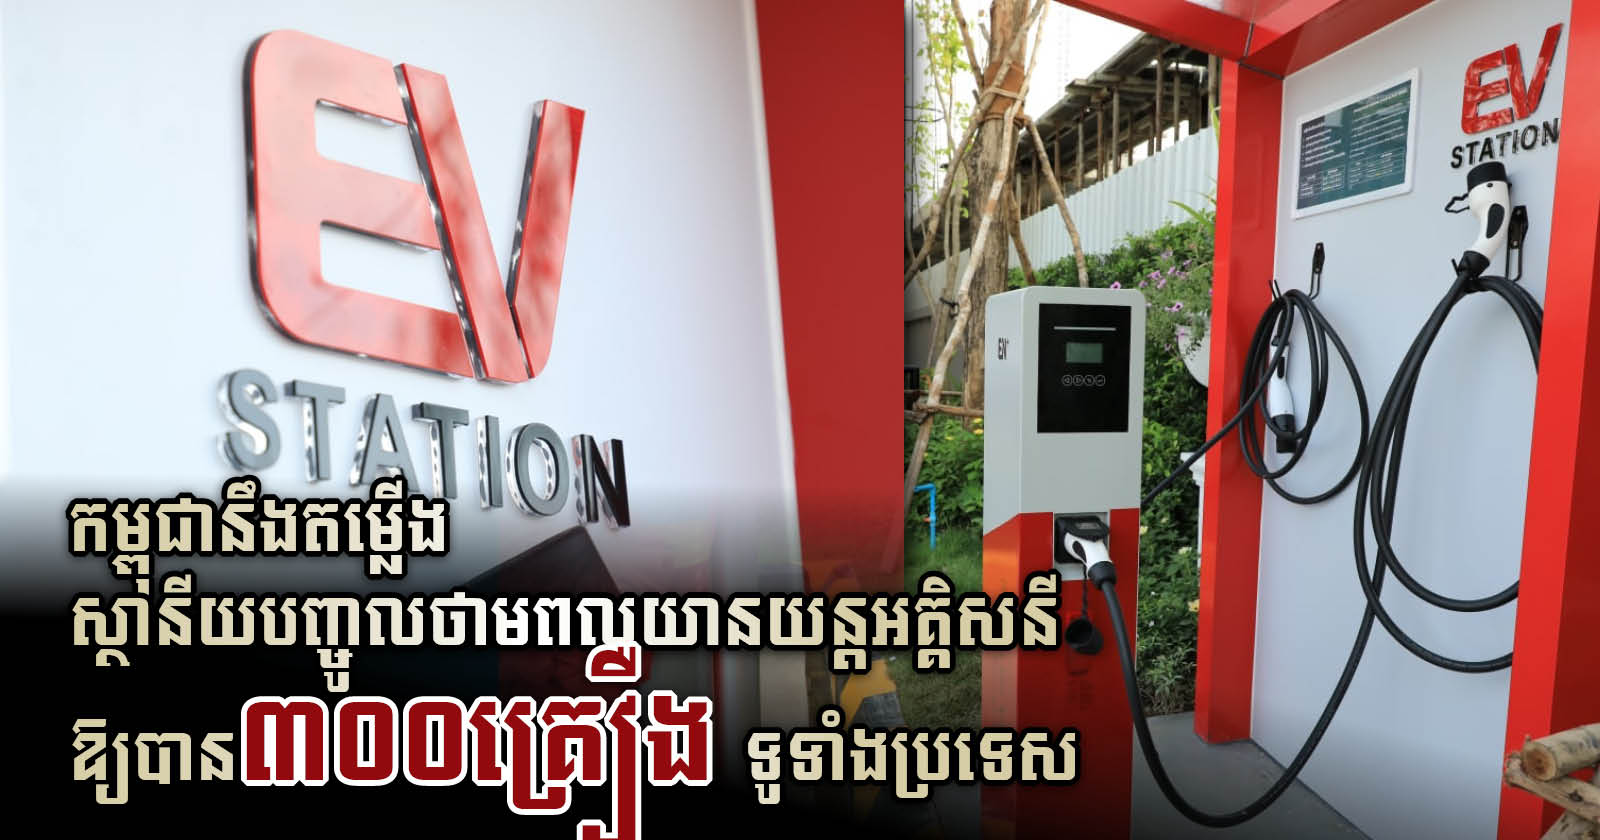 China Pledges 10 EV Chargers to Cambodia